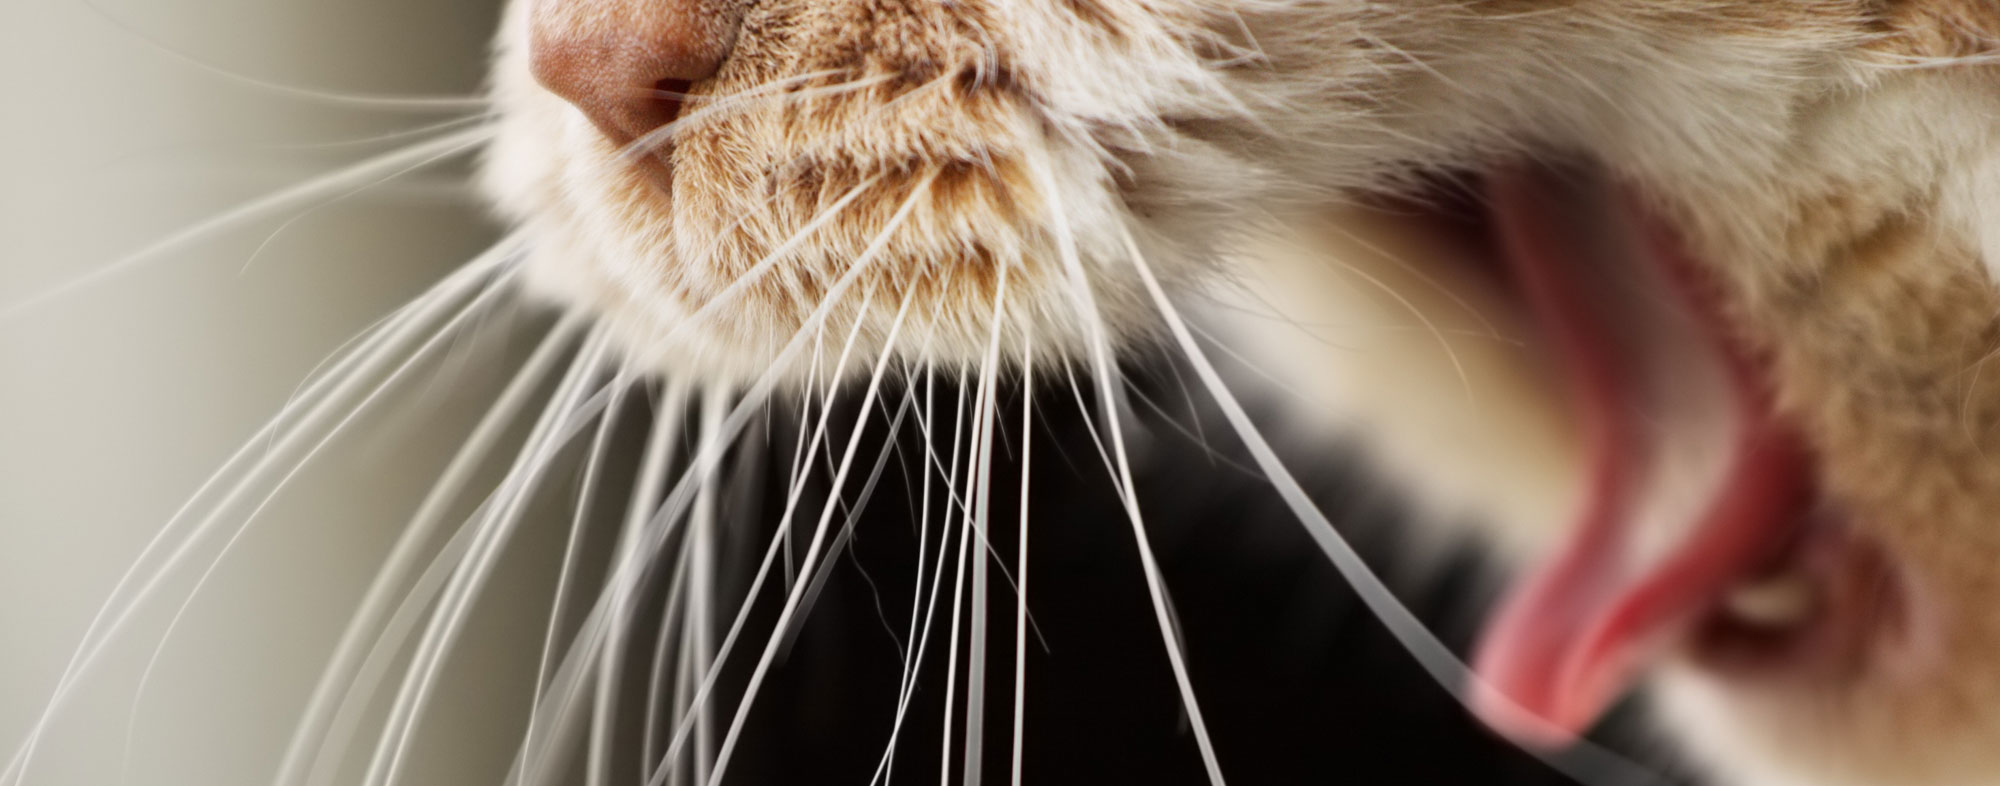 A fibrous diet for your cat could eliminate hairballs